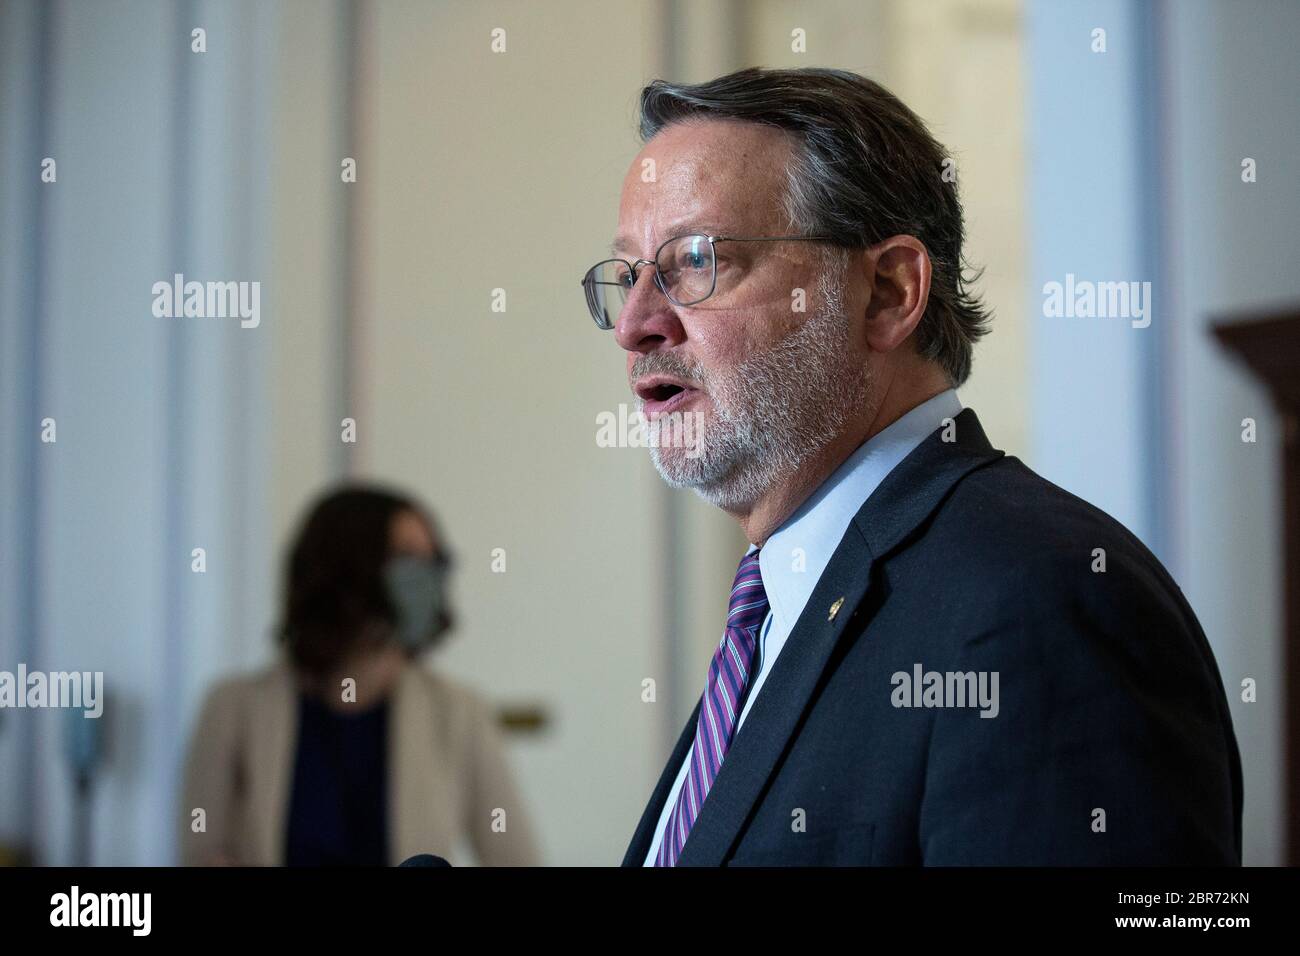 United States Senator Gary Peters (Democrat of Michigan) speaks to members of the media following a U.S. Senate Committee on Homeland Security and Governmental Affairs meeting in the Senate Russell Office Building in Washington, DC, U.S., on Wednesday, May 20, 2020, to consider a motion to issue a subpoena to Blue Star Strategies. Credit: Stefani Reynolds/CNP /MediaPunch Stock Photo